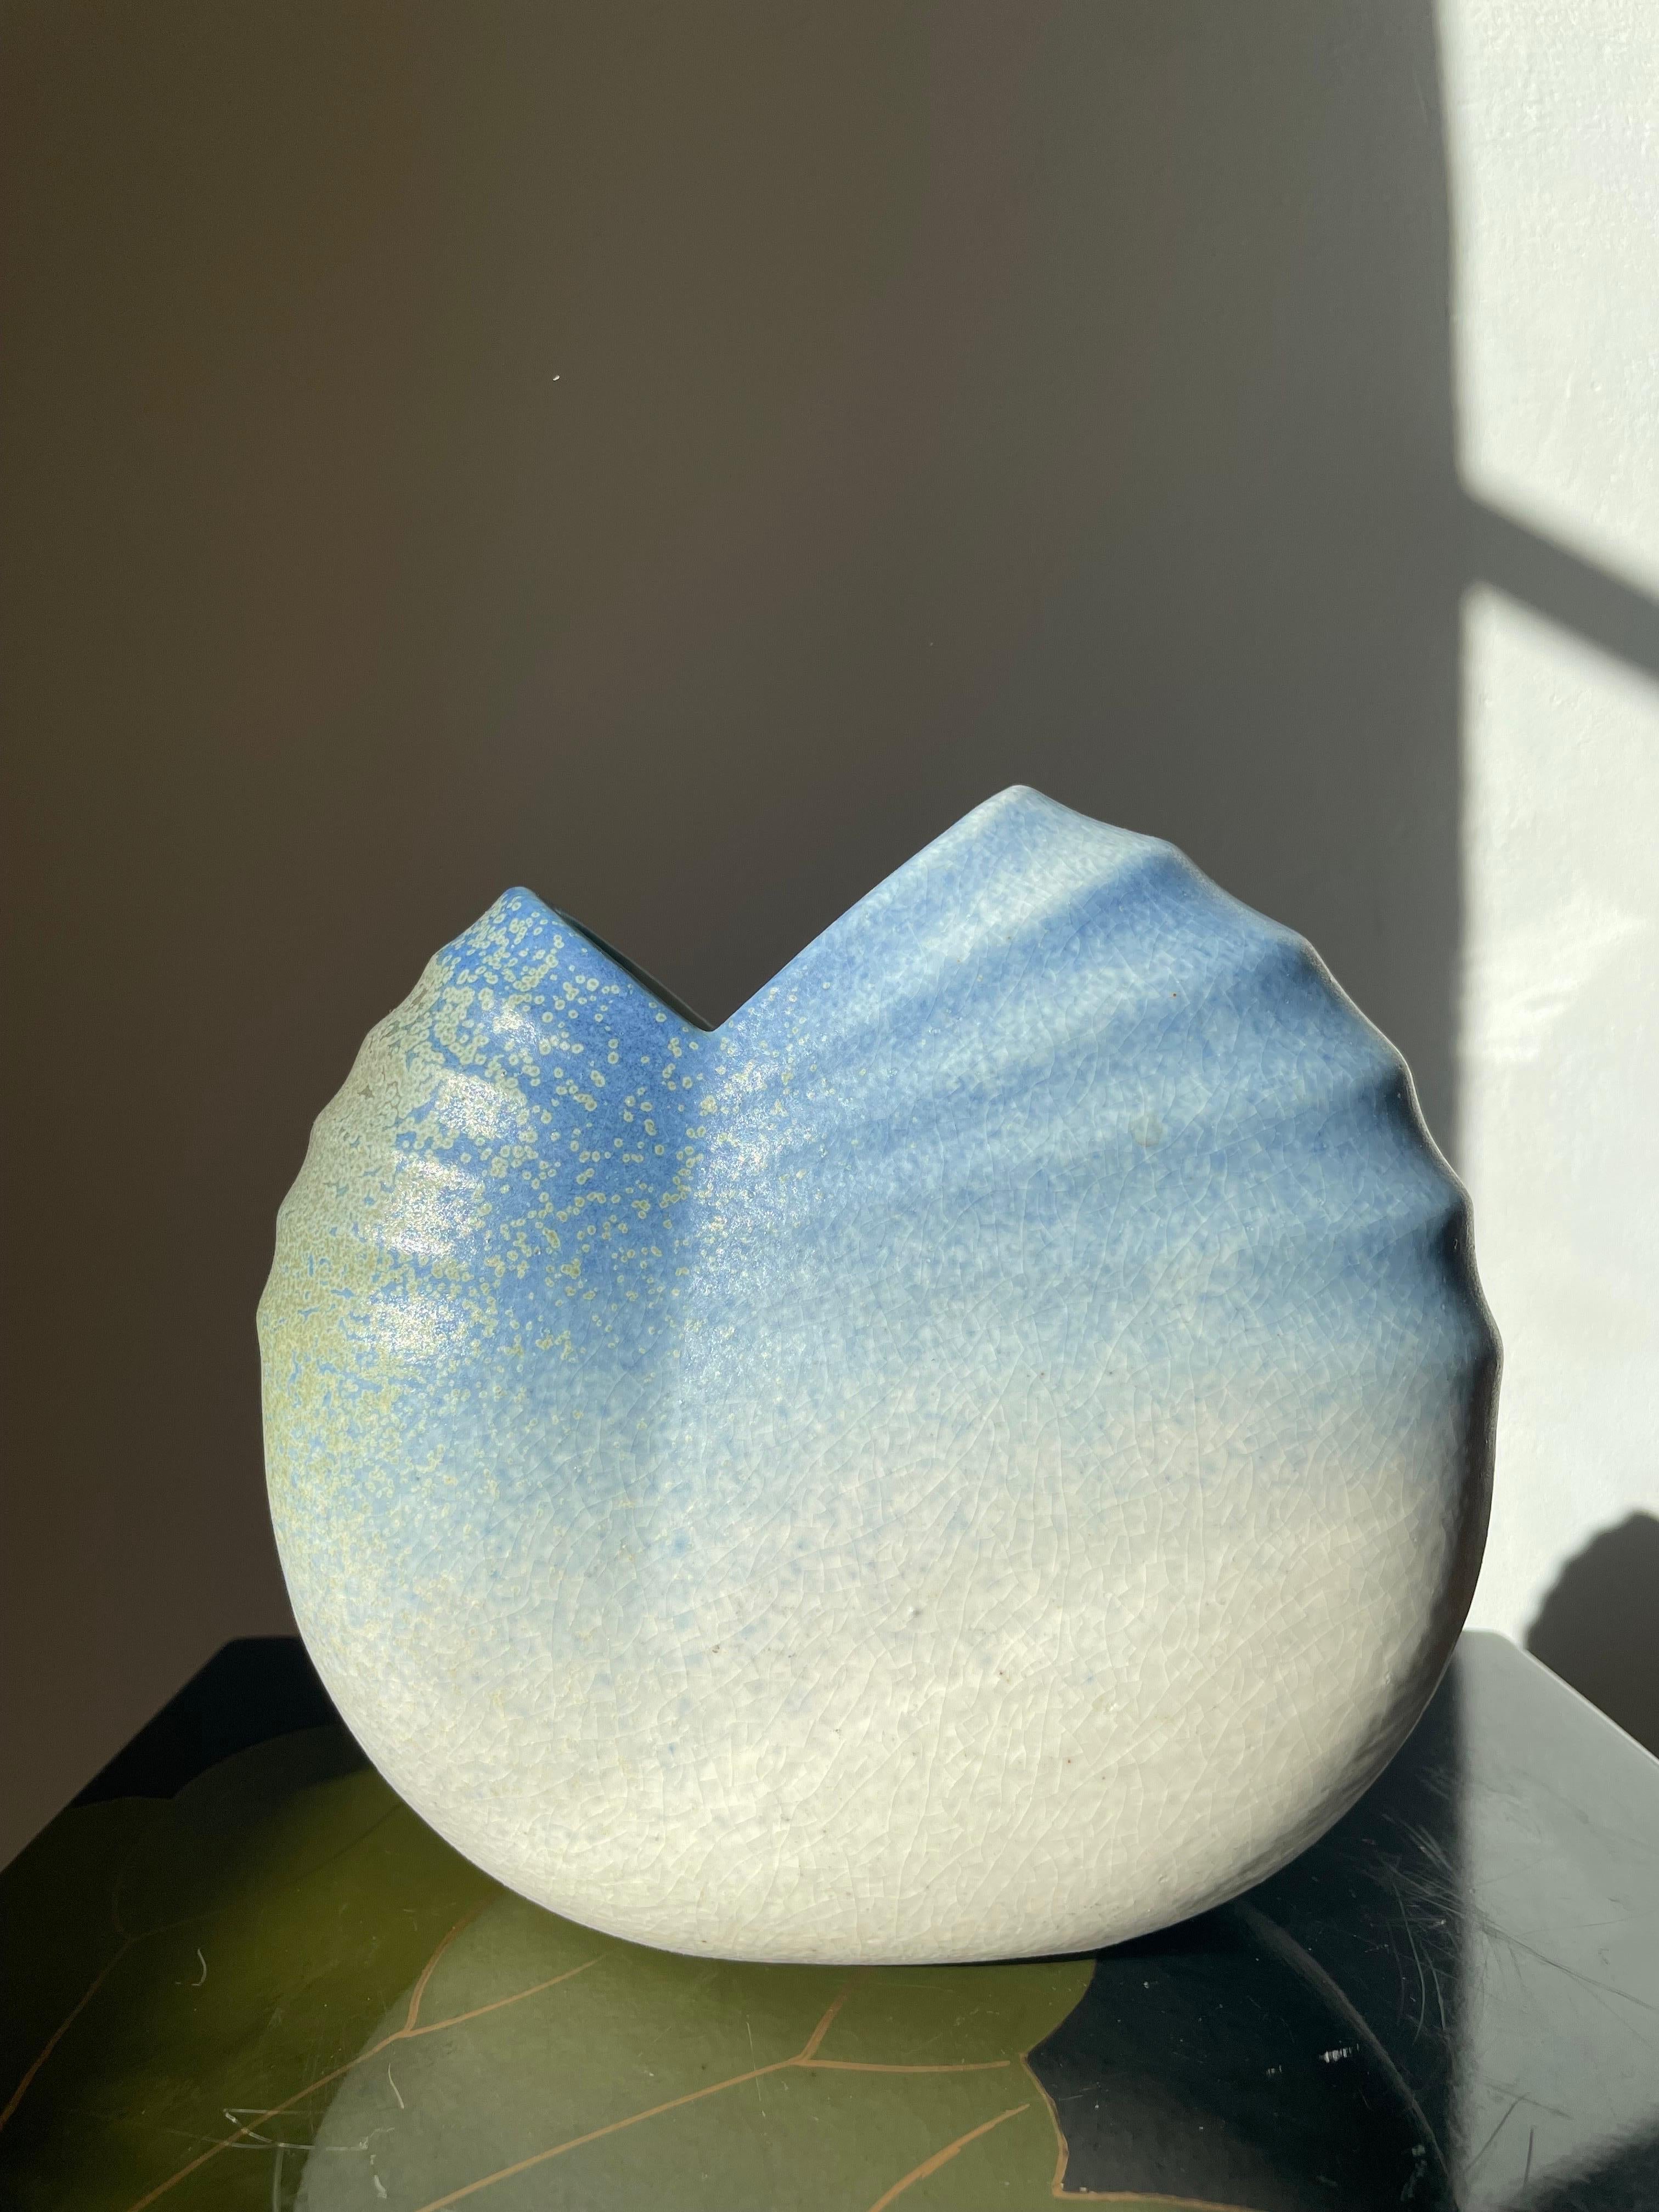 Organic Scandinavian Modern scalloped asymmetrical vase with stunning matte aqua glaze. Green, blue and white colors over soft ripples. Stamped under base with original label. Beautiful vintage condition.